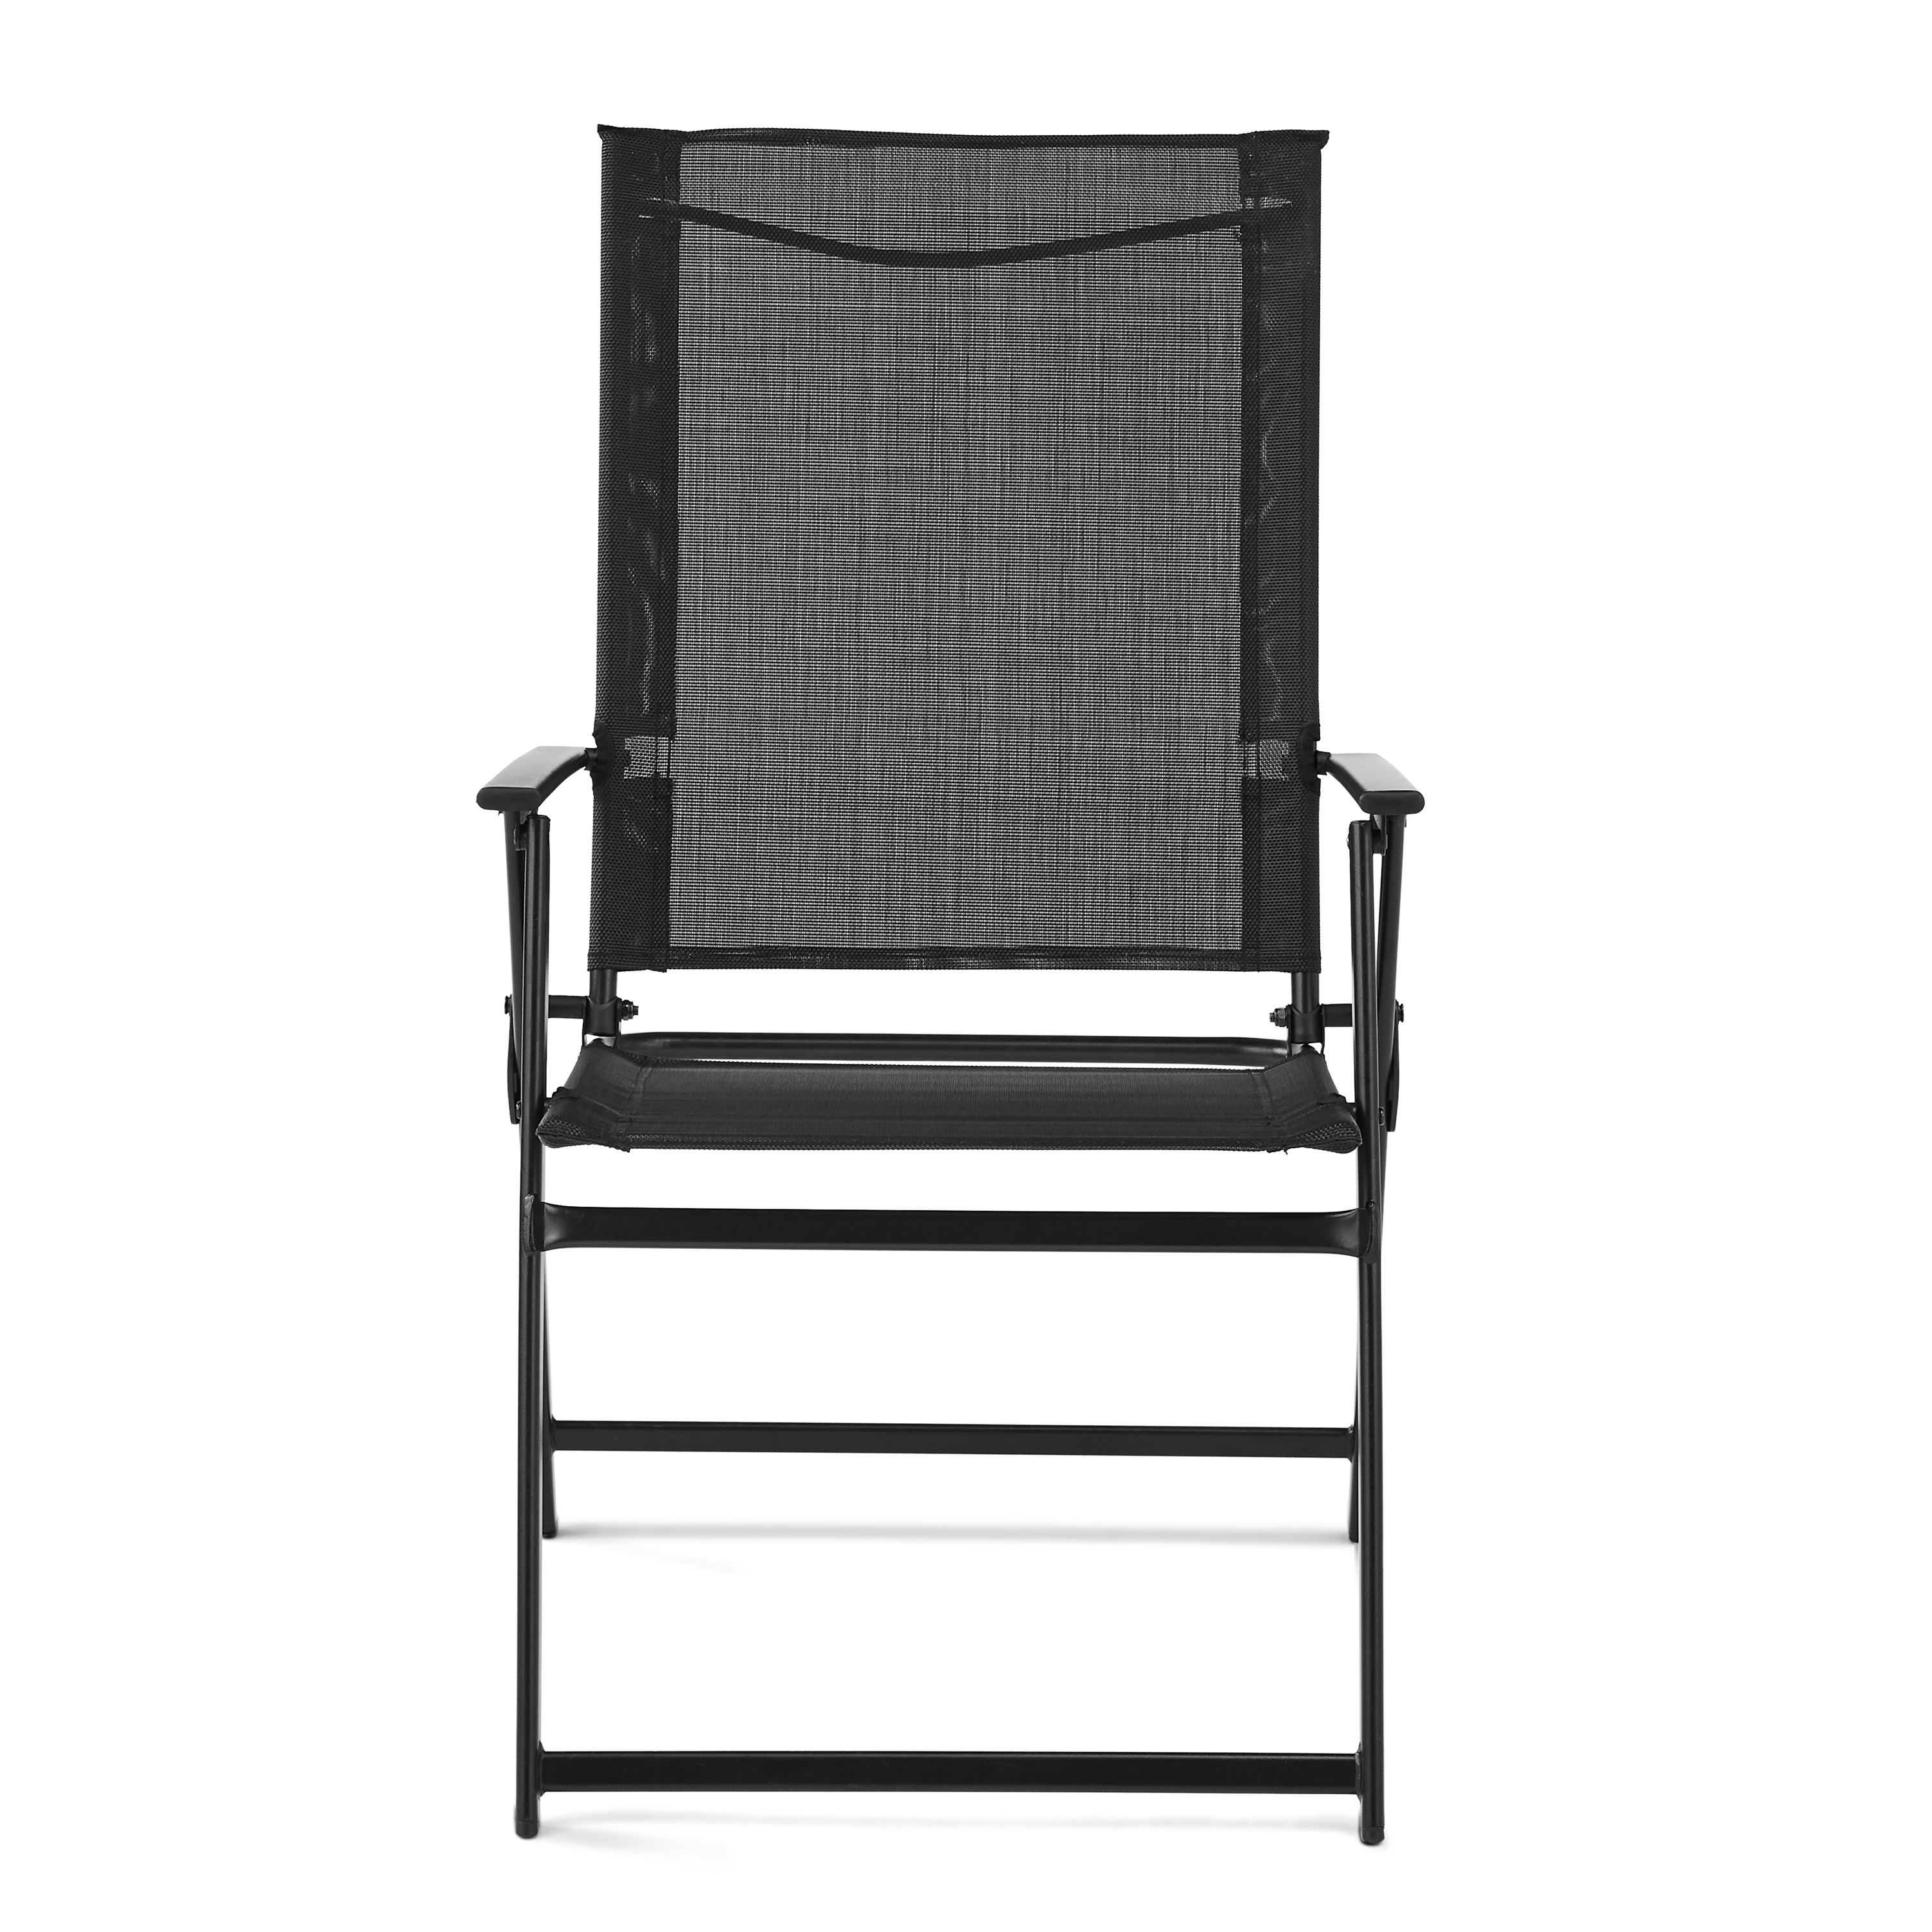 Mainstays Greyson Steel and Sling Folding Outdoor Patio Armchair - Set of 2, Black - image 1 of 8